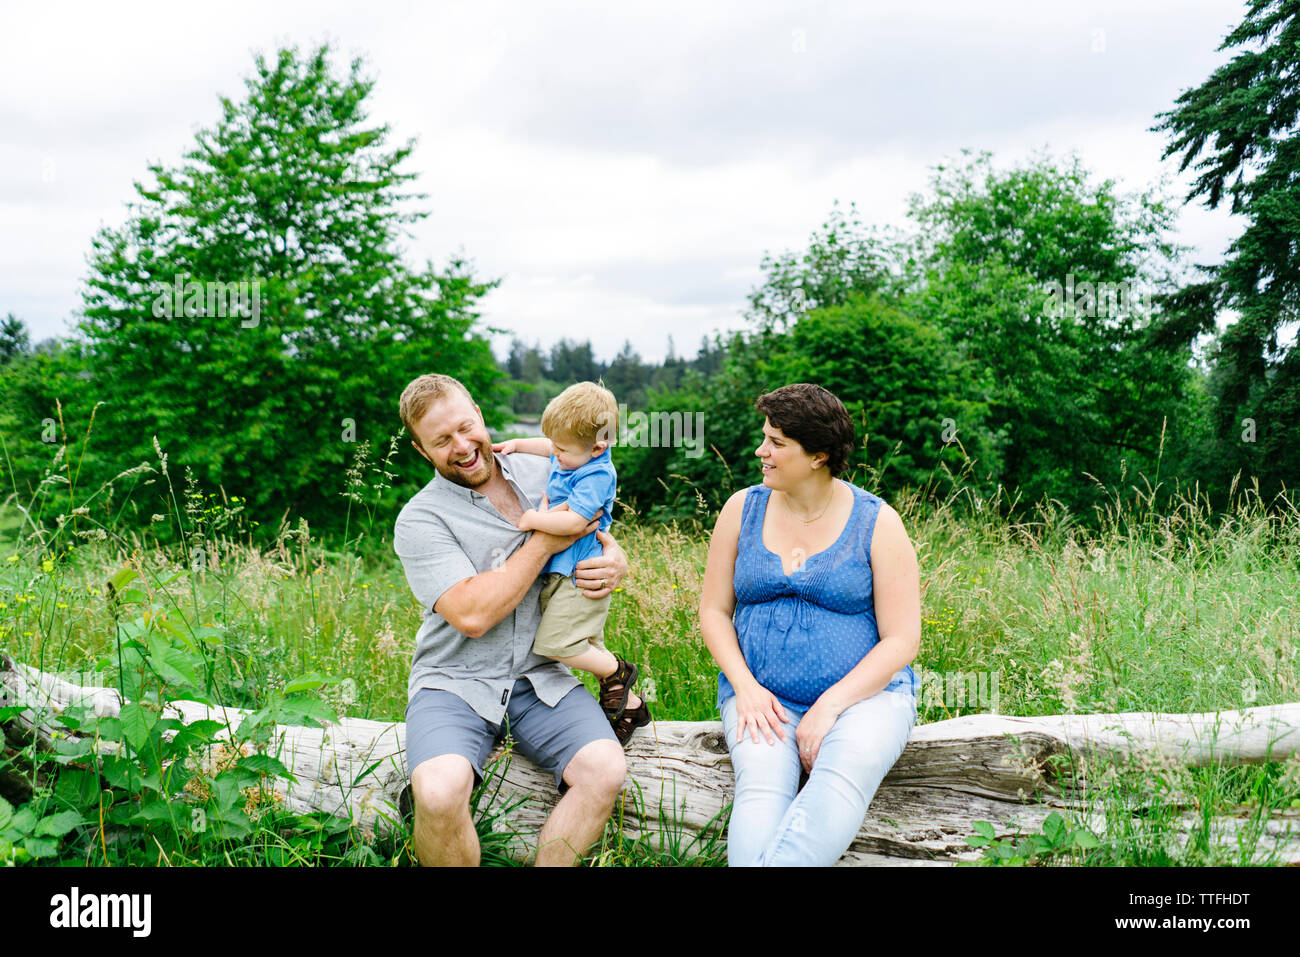 Straight on portrait of a young family playing together Stock Photo